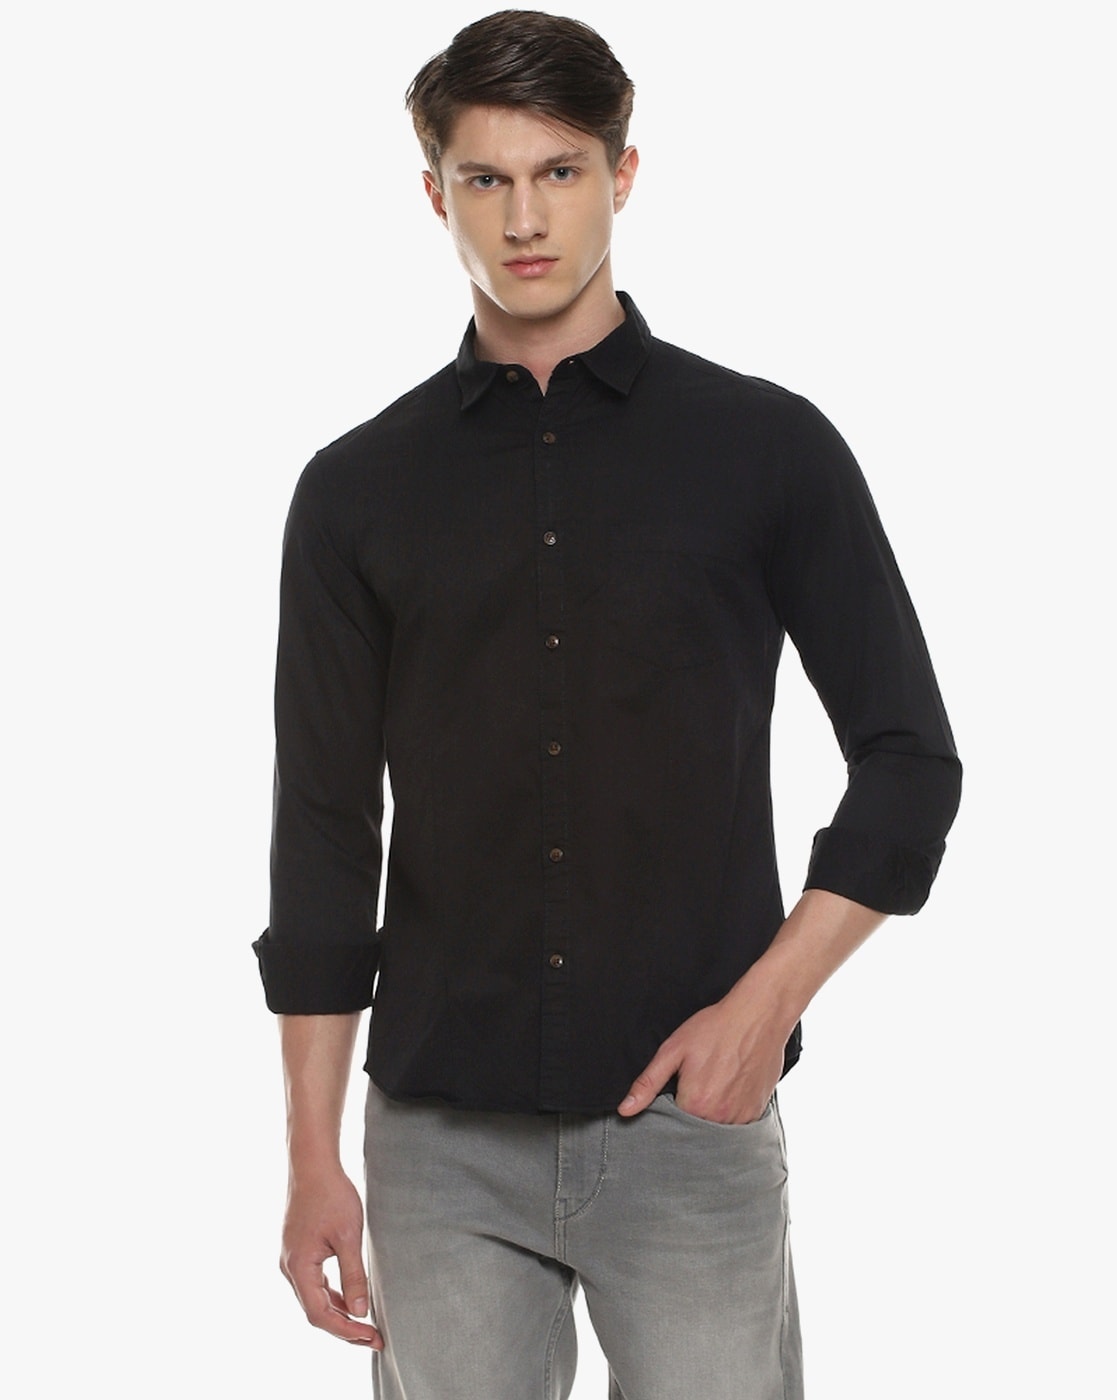 Buy Black Shirts for Men by Buffalo Online